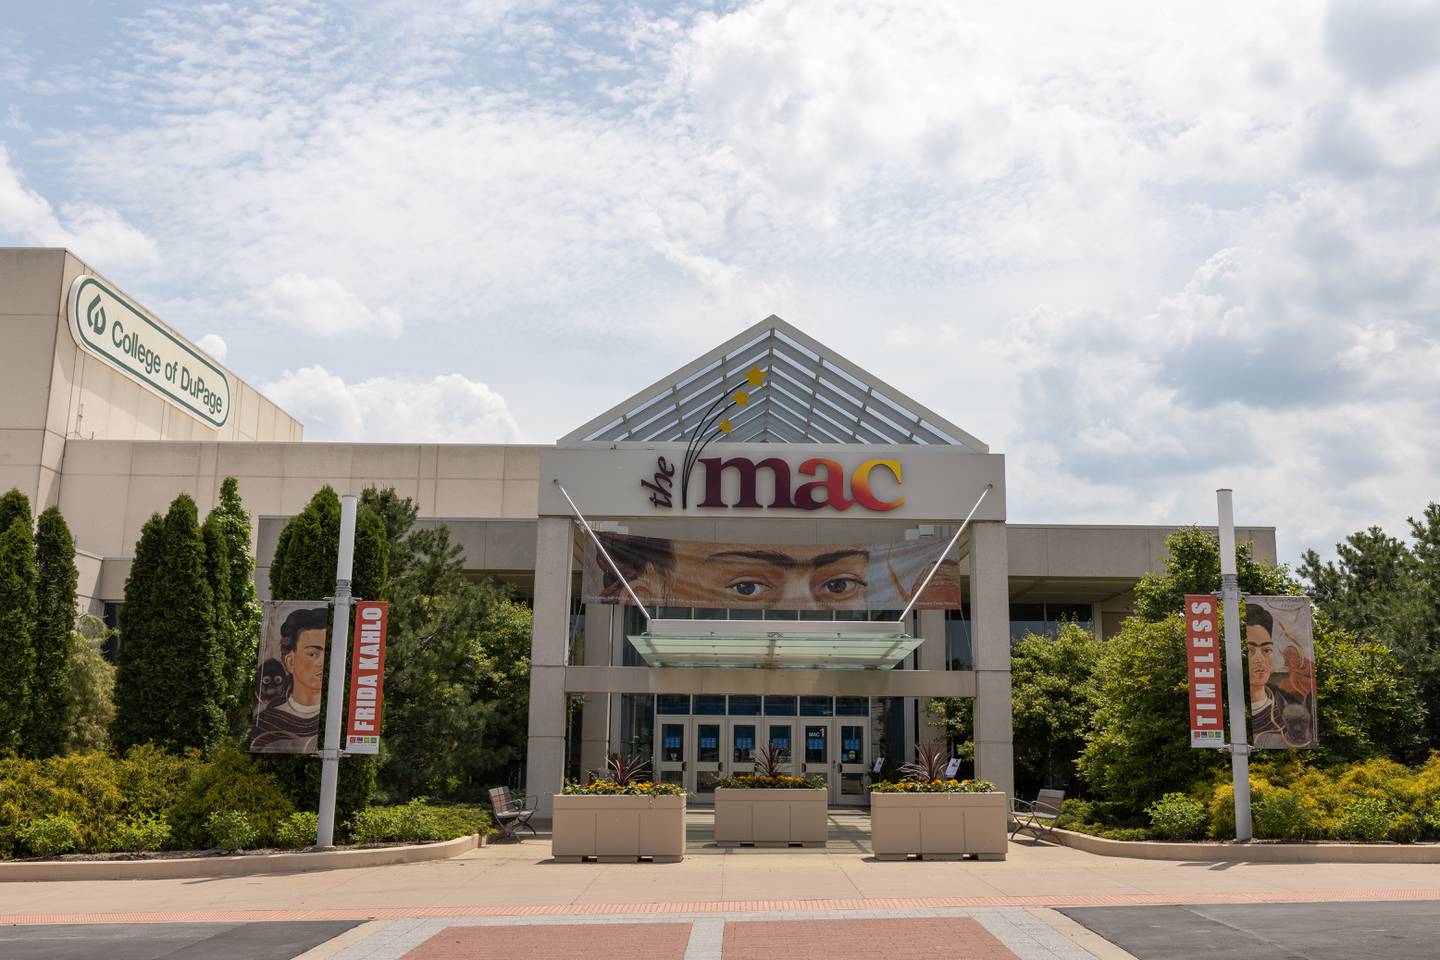 The McAninch Arts Center is home to the Cleve Carney Museum of Art.